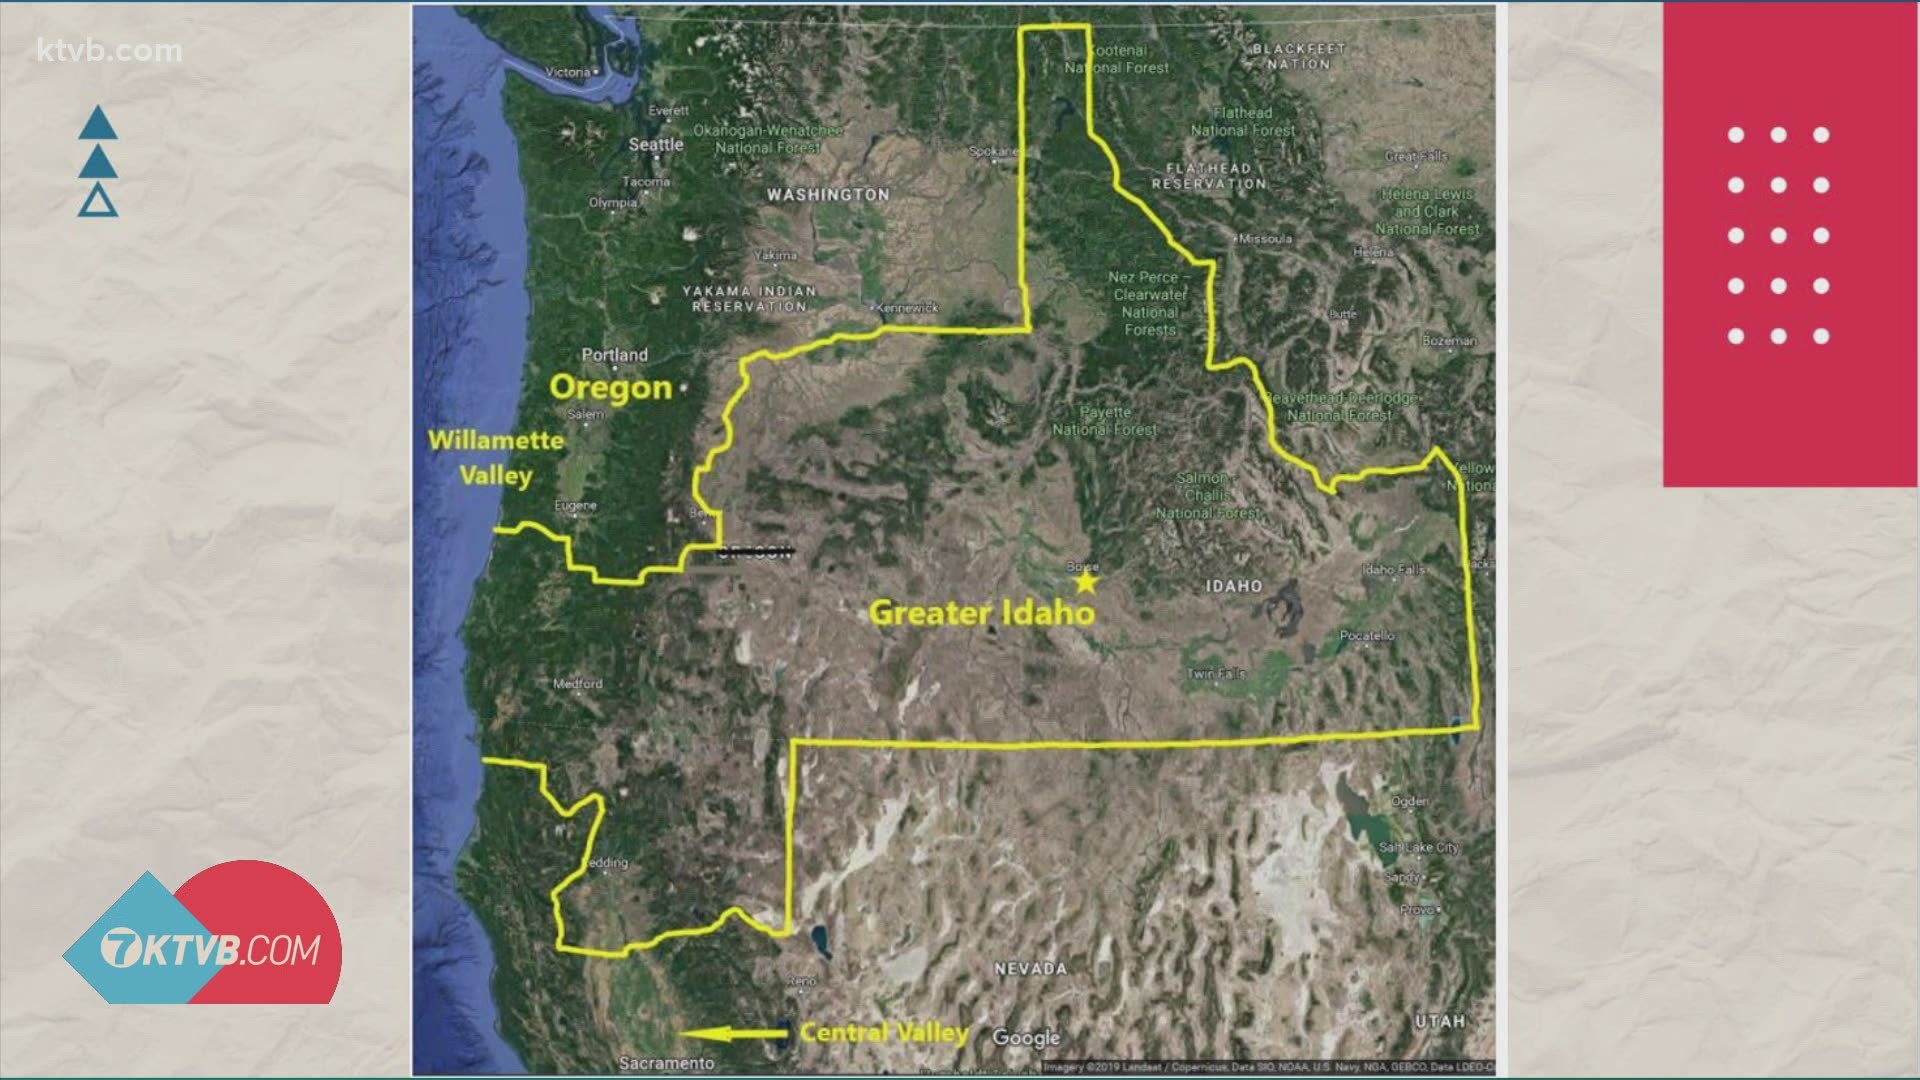 The president of Move Oregon's Borders told the committee that some Oregonians are willing to lose some of their freedoms granted under Oregon law to be in Idaho.